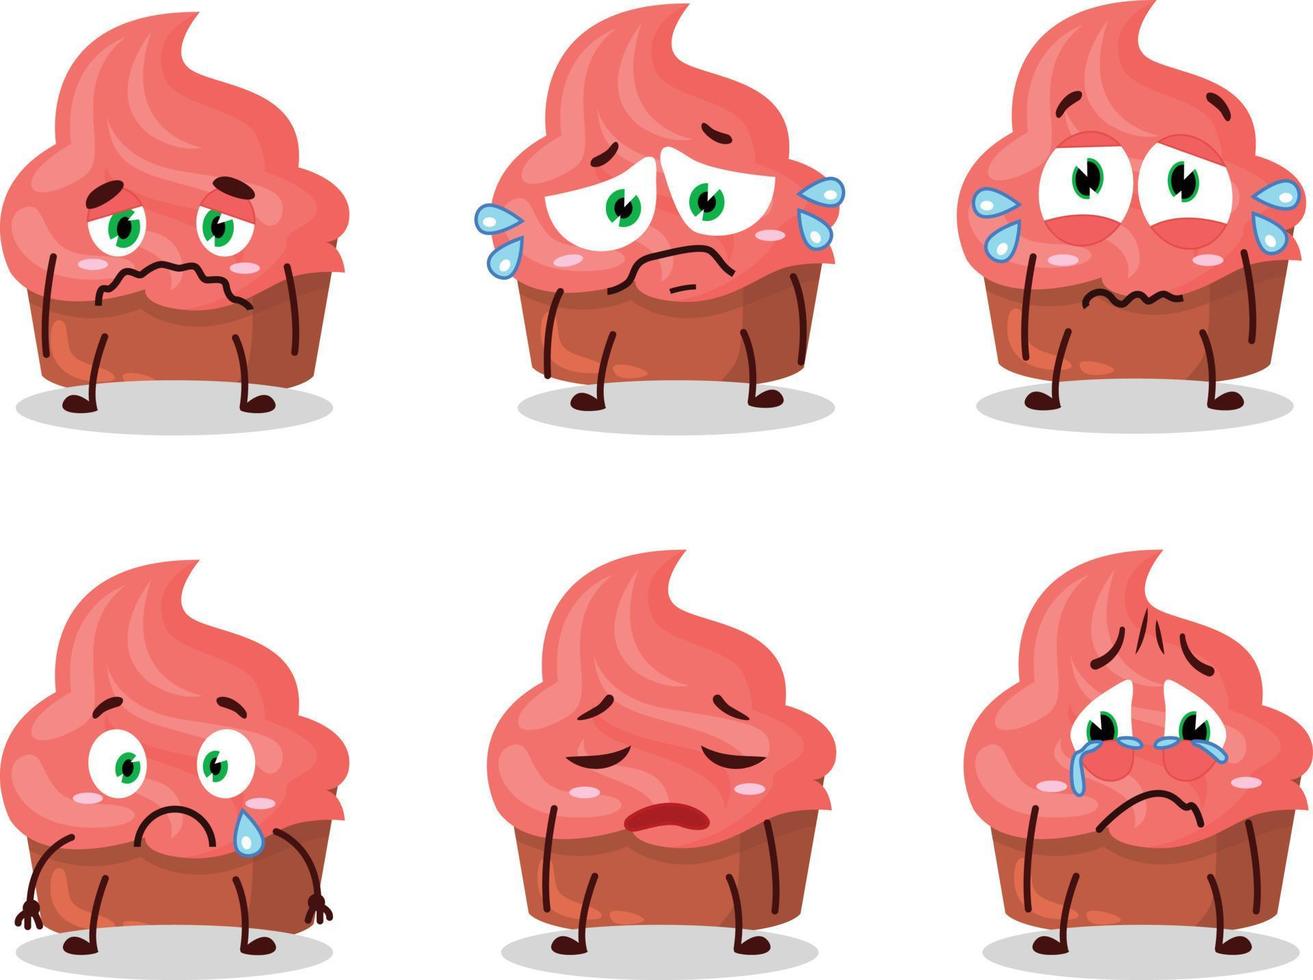 Strawberry cake cartoon character with sad expression vector